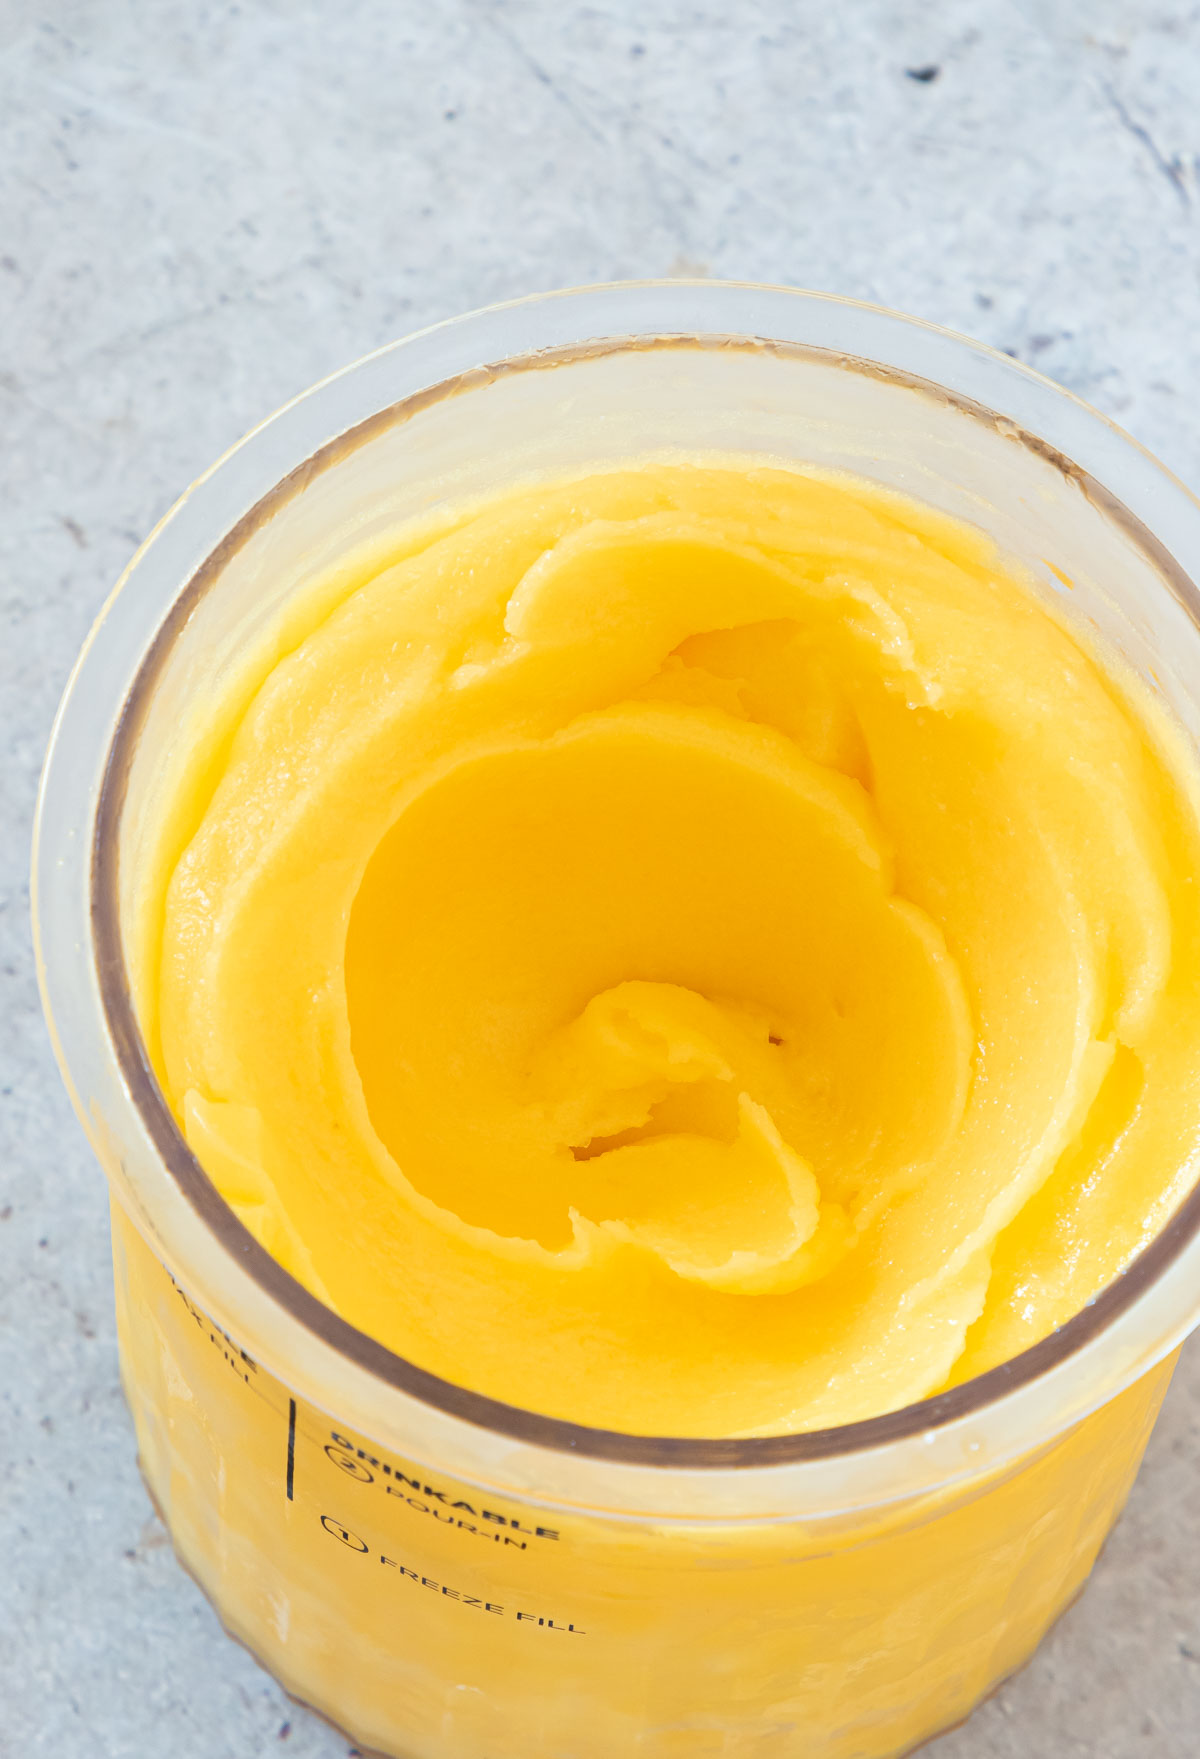 the finished mango sorbet inside the Ninja Creami pint container.